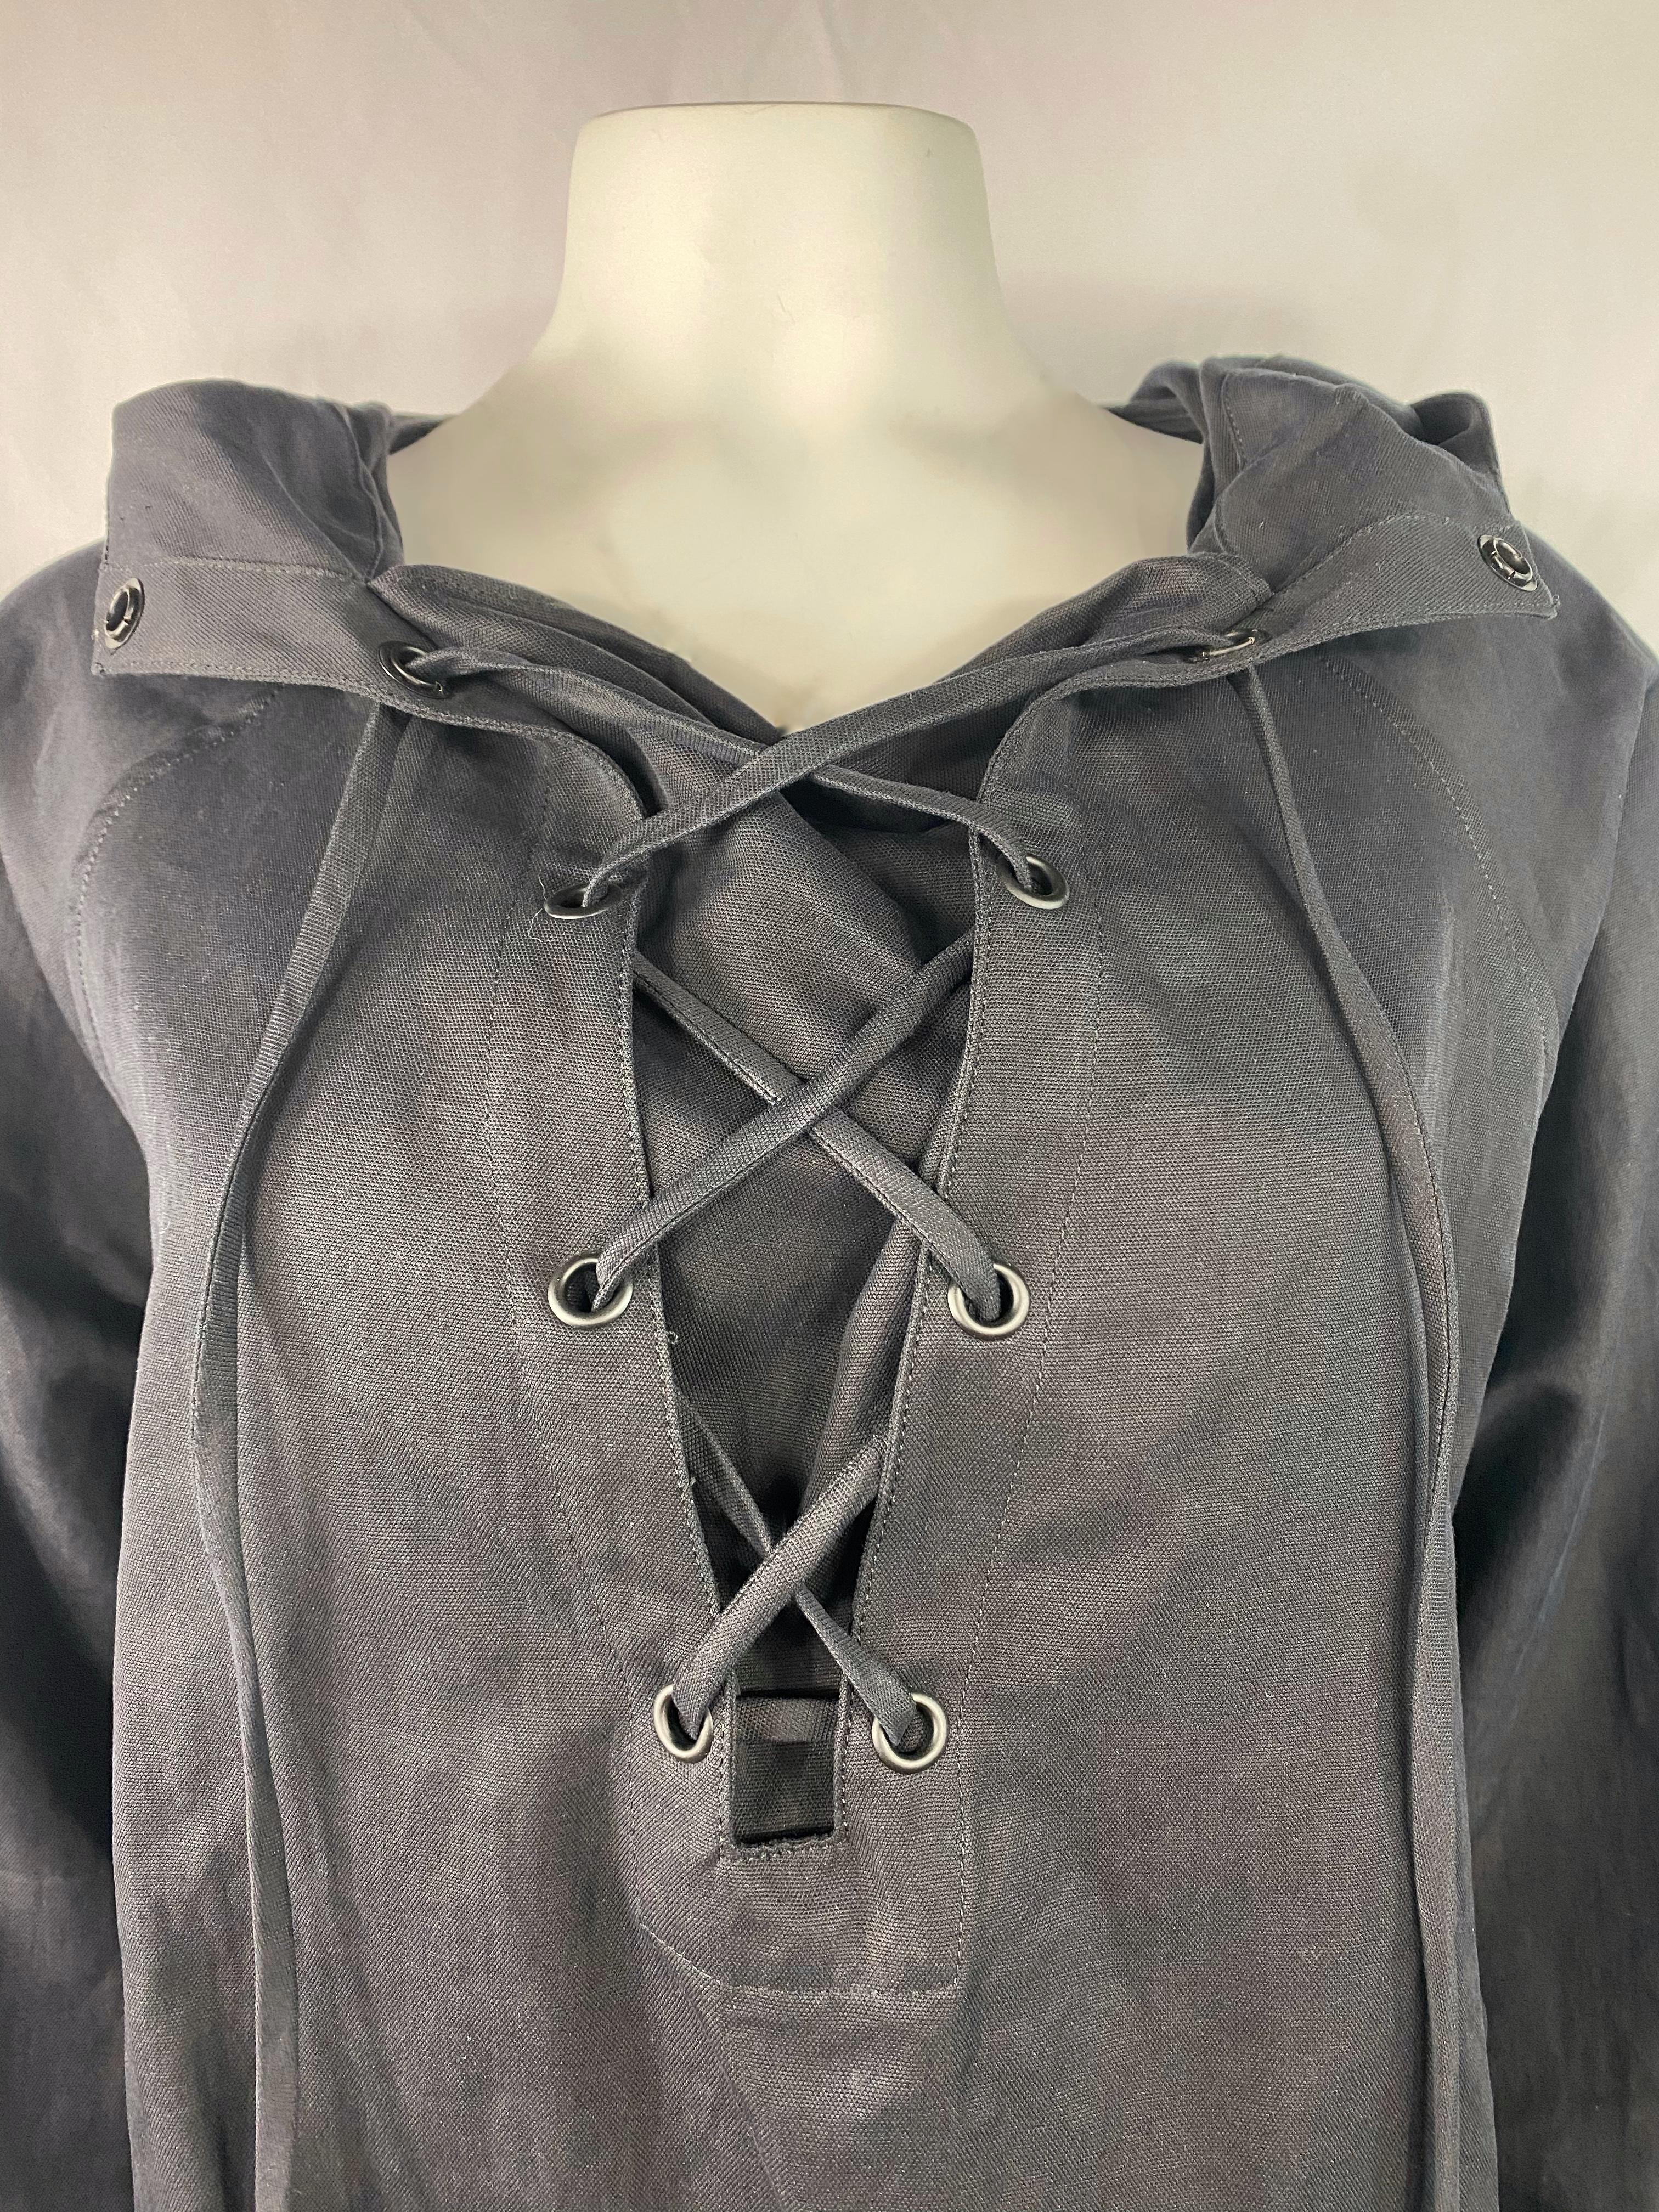 Product details:

The top features black cotton blend with the hood detail on the back, lace closure on the front and pockets on the sides. Made in USA.